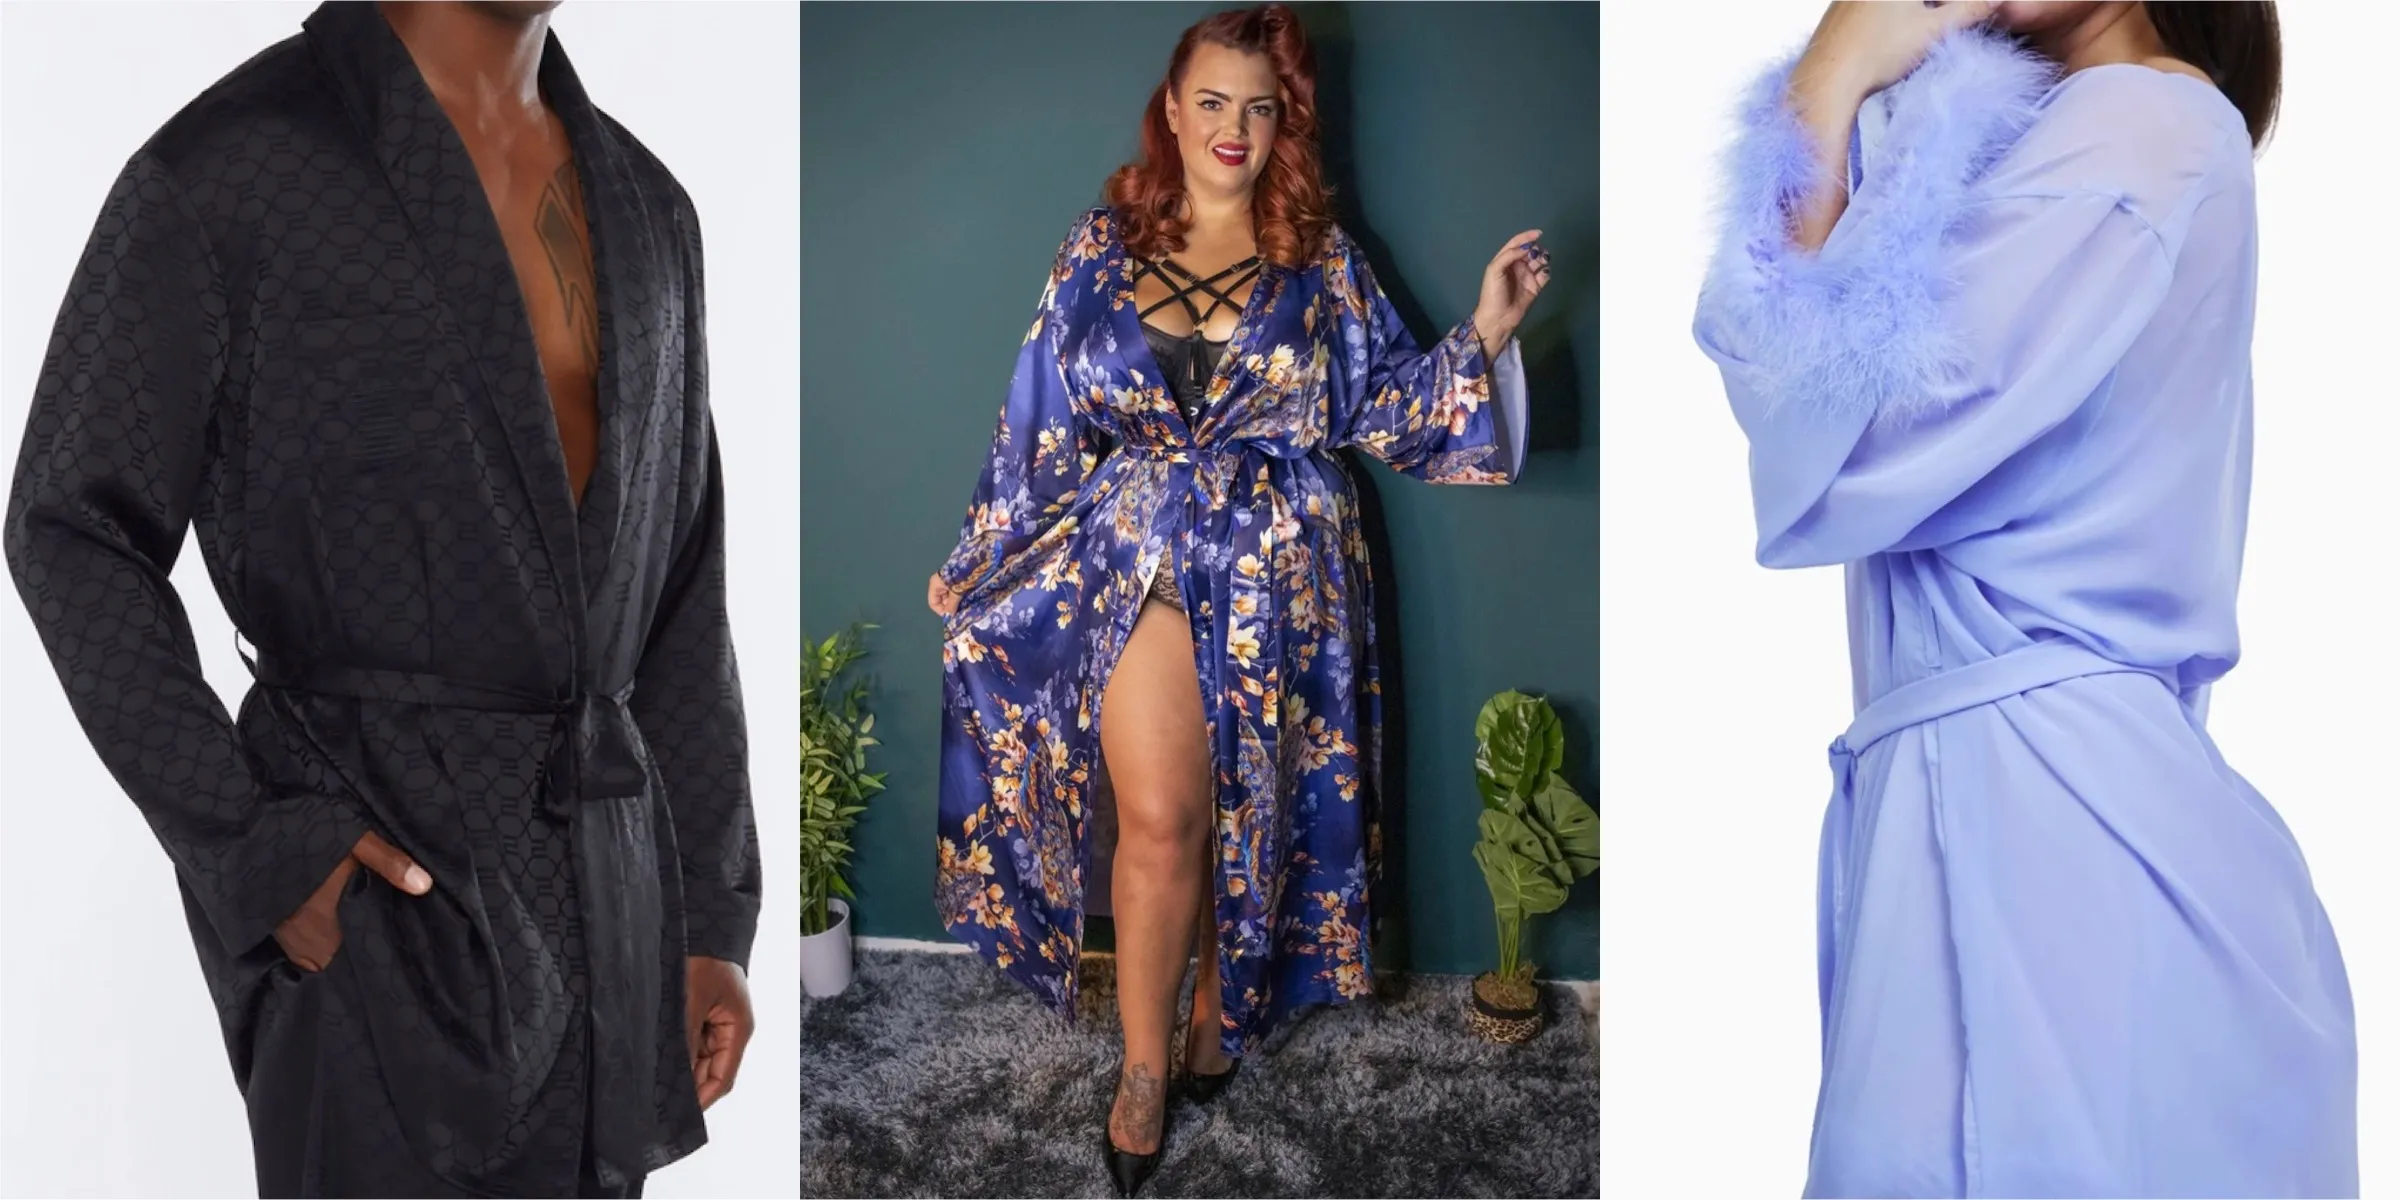 A collage of three models wearing robes, from L to R, a men's smoking jacket, a flowing satin peacock-patterned robe, and a feathered lilac chiffon robe